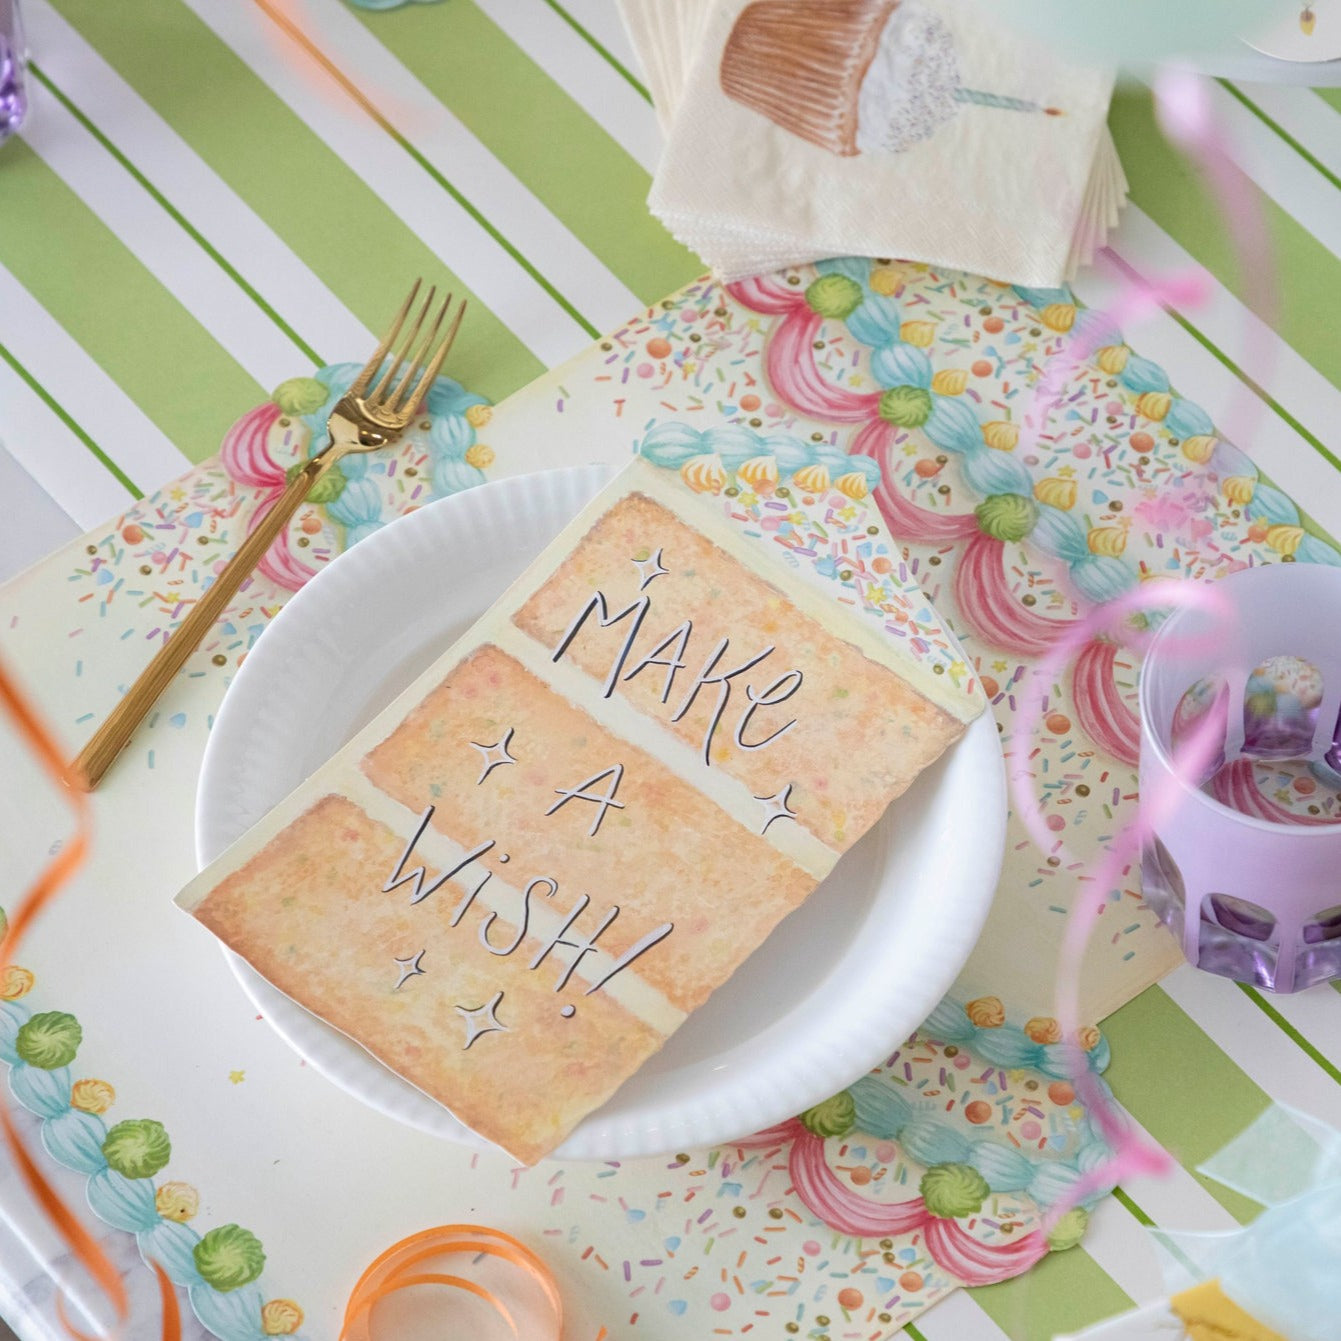 The Die-cut Birthday Cake Placemat under a birthday place setting.